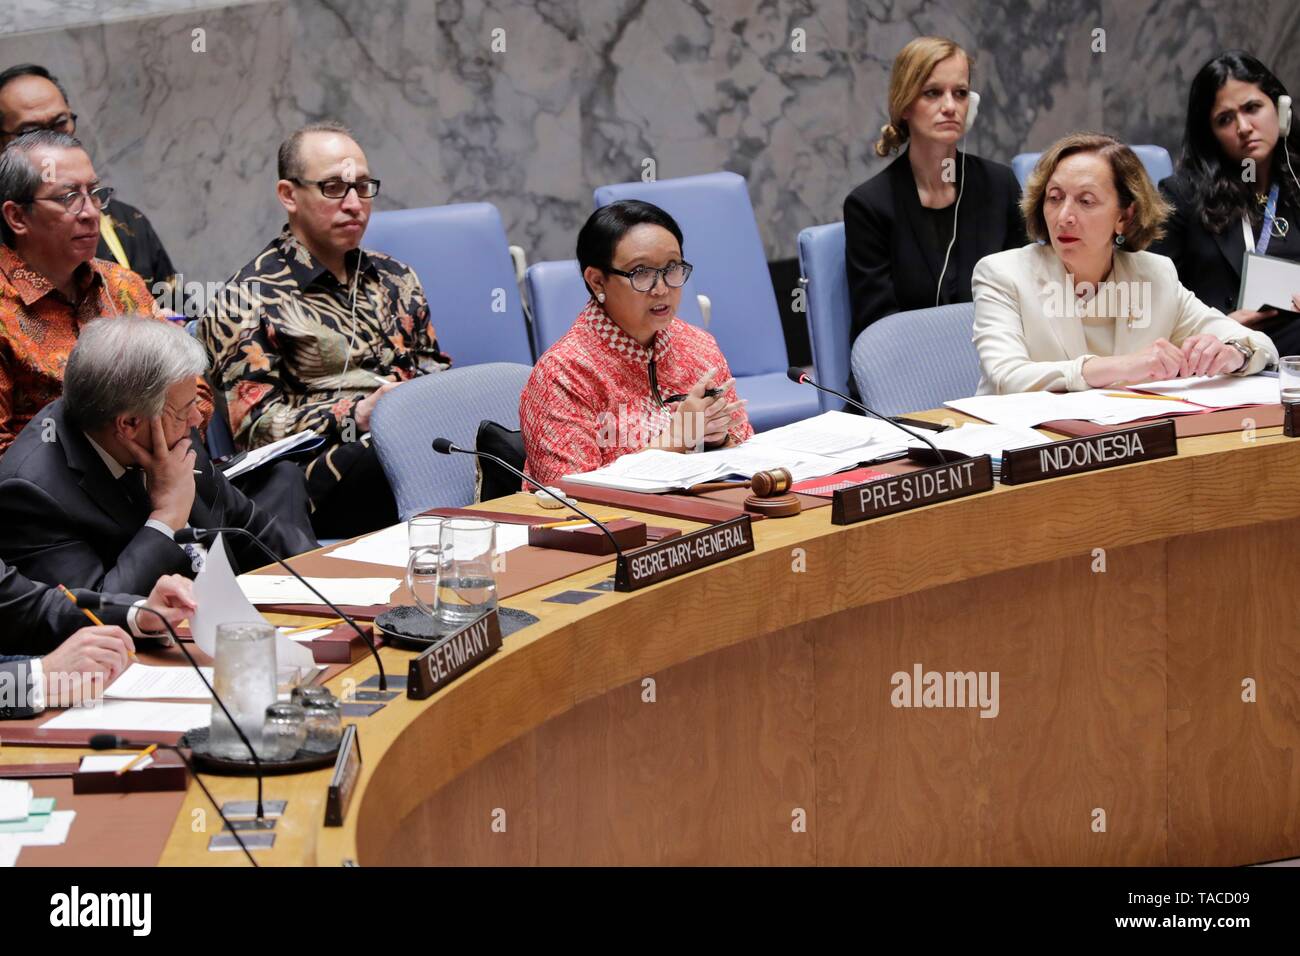 United Nations, New York, USA, May 23, 2019 - Retno Lestari Priansari Marsudi, Minister for Foreign Affairs of the Republic of Indonesia and President of the Security Council for the month of May, chairs the Security Council debate on protection of civilians in armed conflict today at the UN Headquarters in New York. Photo: Luiz Rampelotto/EuropaNewswire PHOTO CREDIT MANDATORY. | usage worldwide Stock Photo